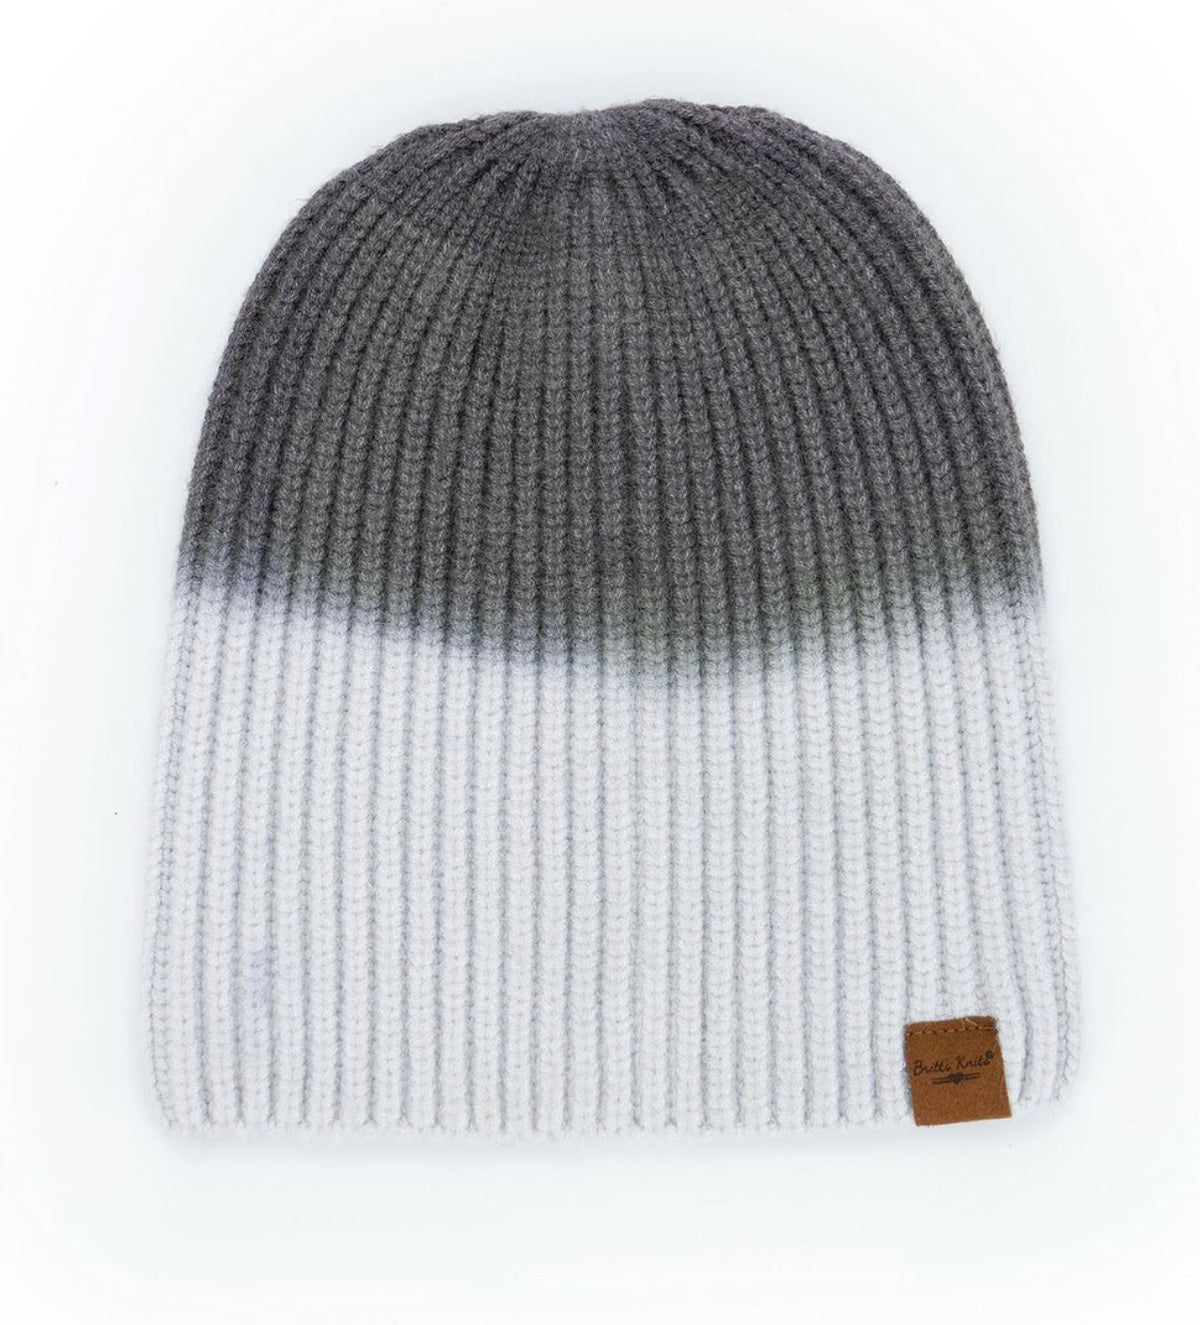 Britts Knits Double Dip Beanie  Hat - Gray